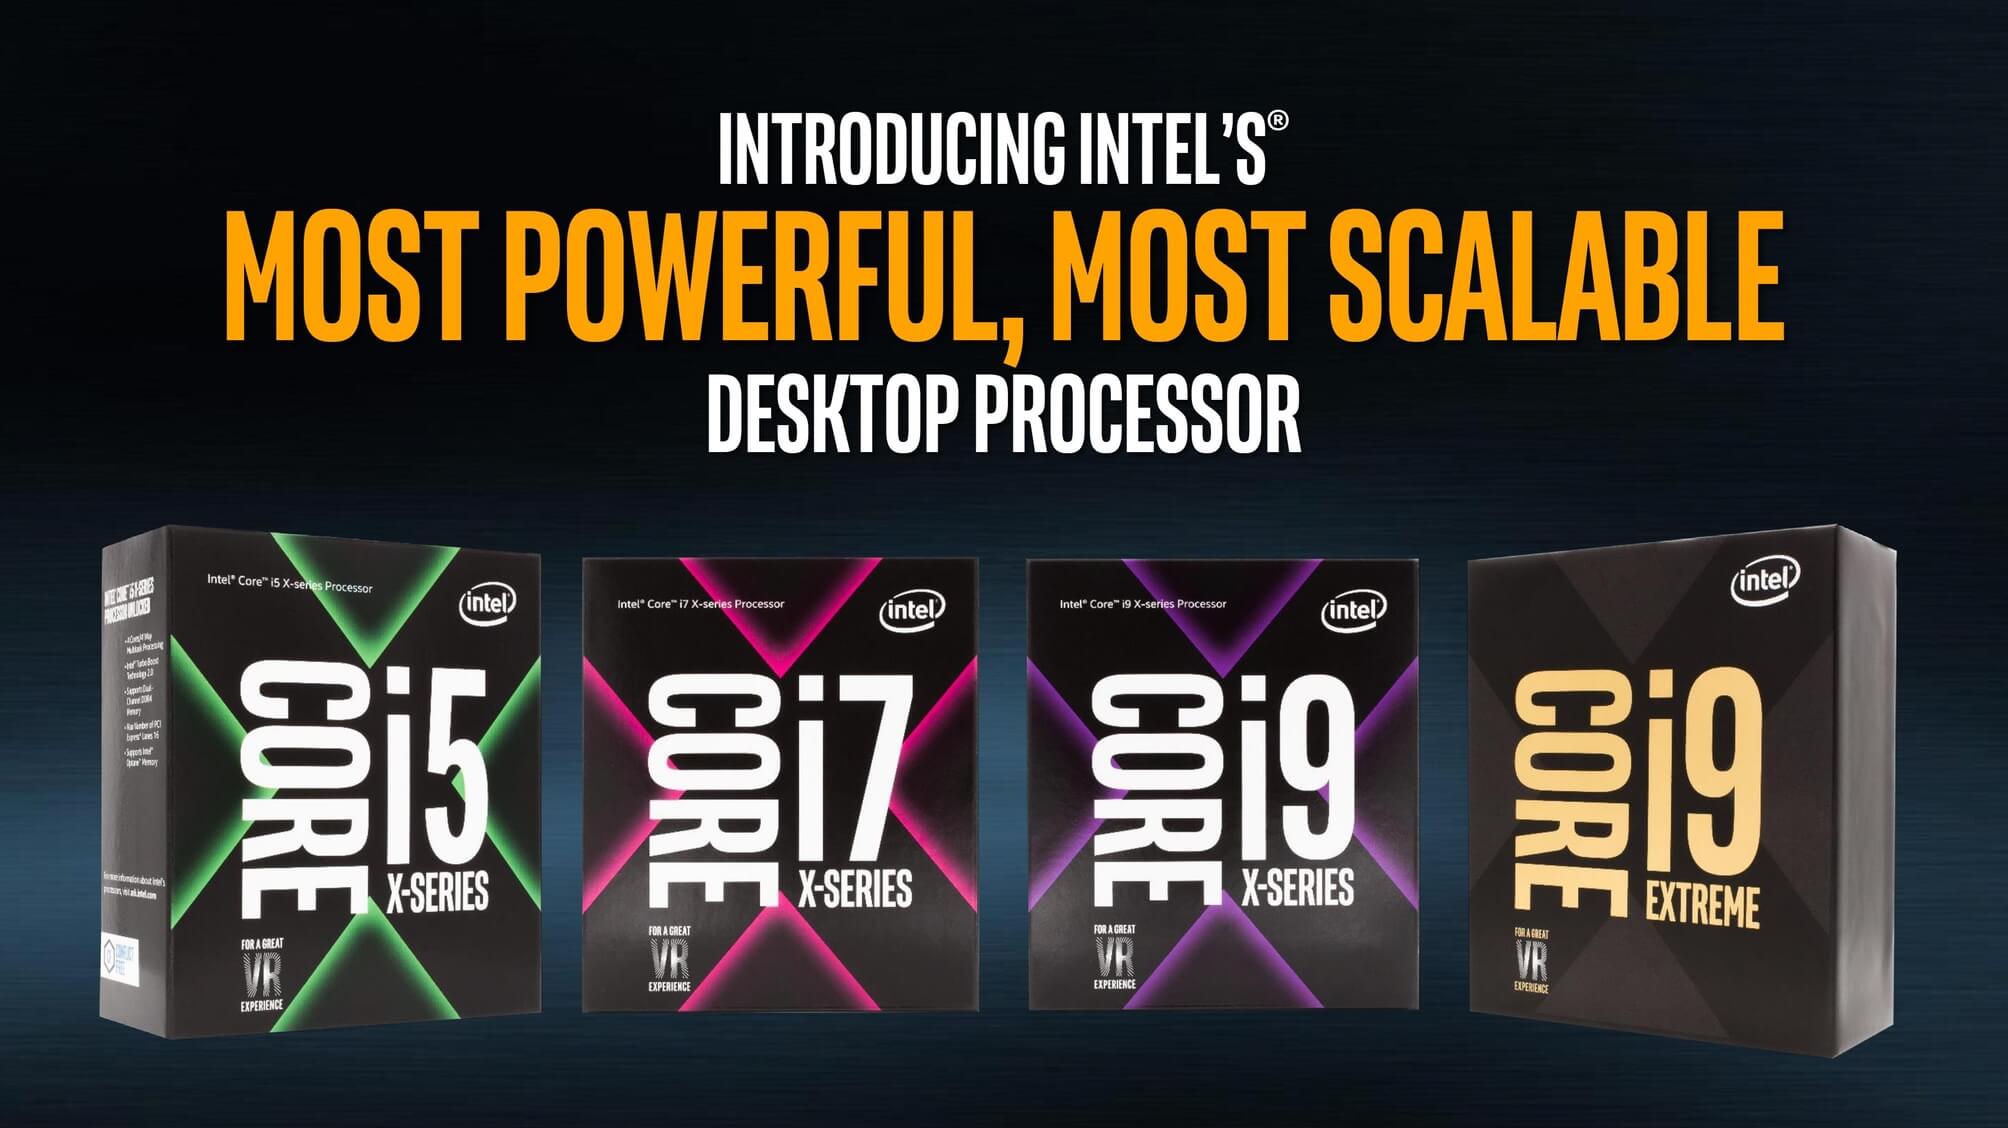 Intel unveils new X-series processors, including the $2,000 18-core/36-thread i9 chip